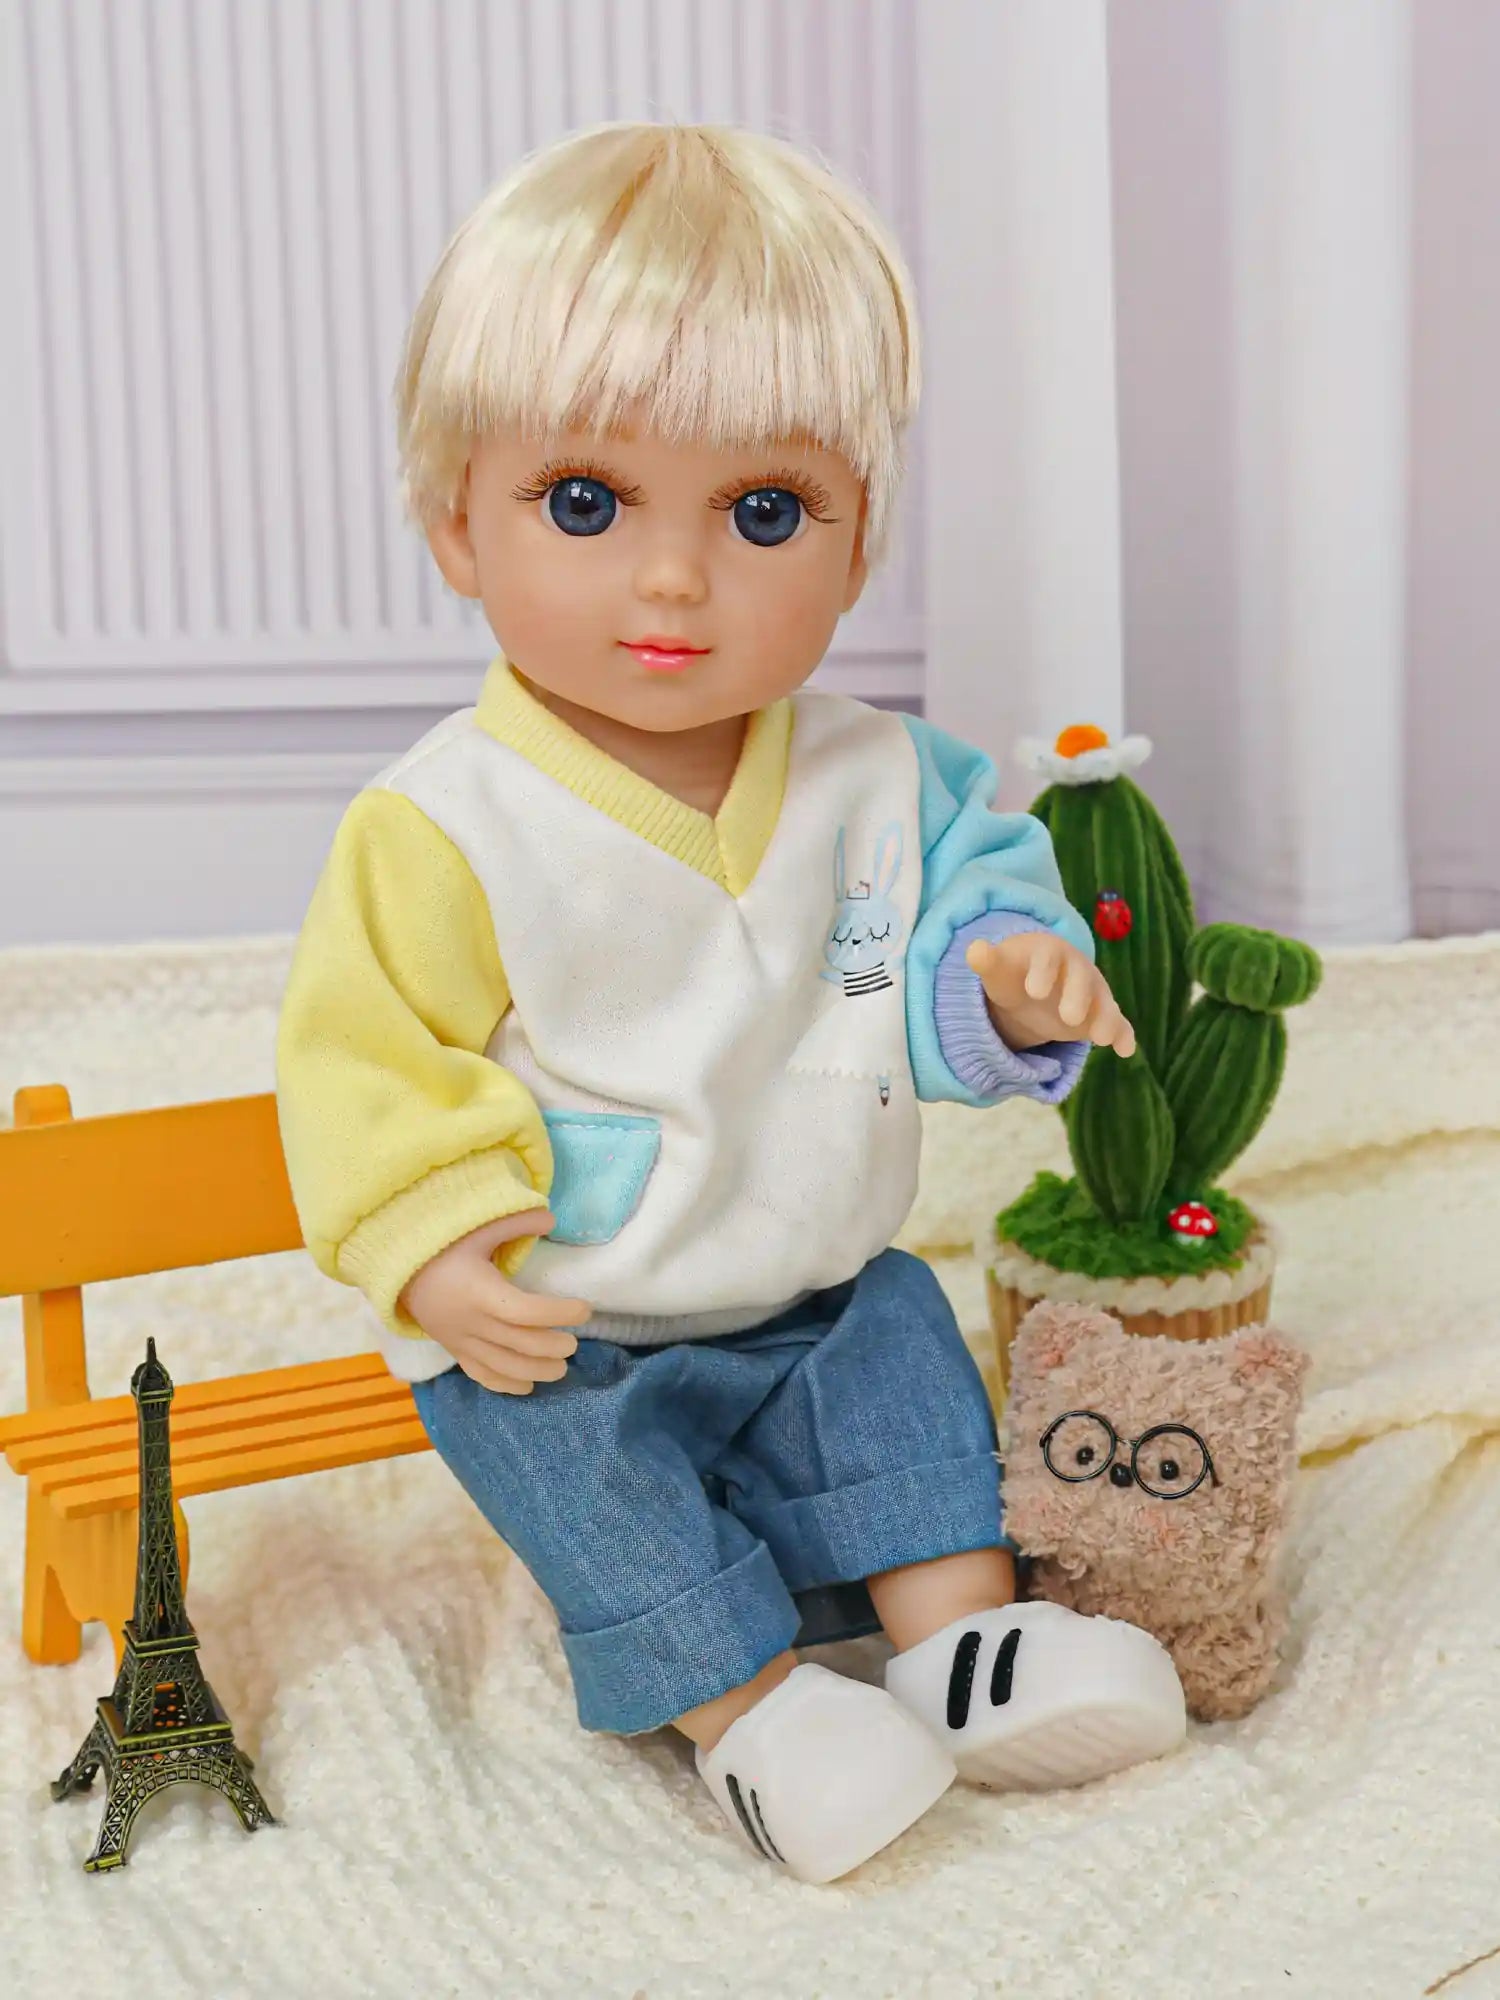 Cute toy doll with blonde bangs, in a colorful outfit, accompanied by a toy owl and Eiffel Tower.